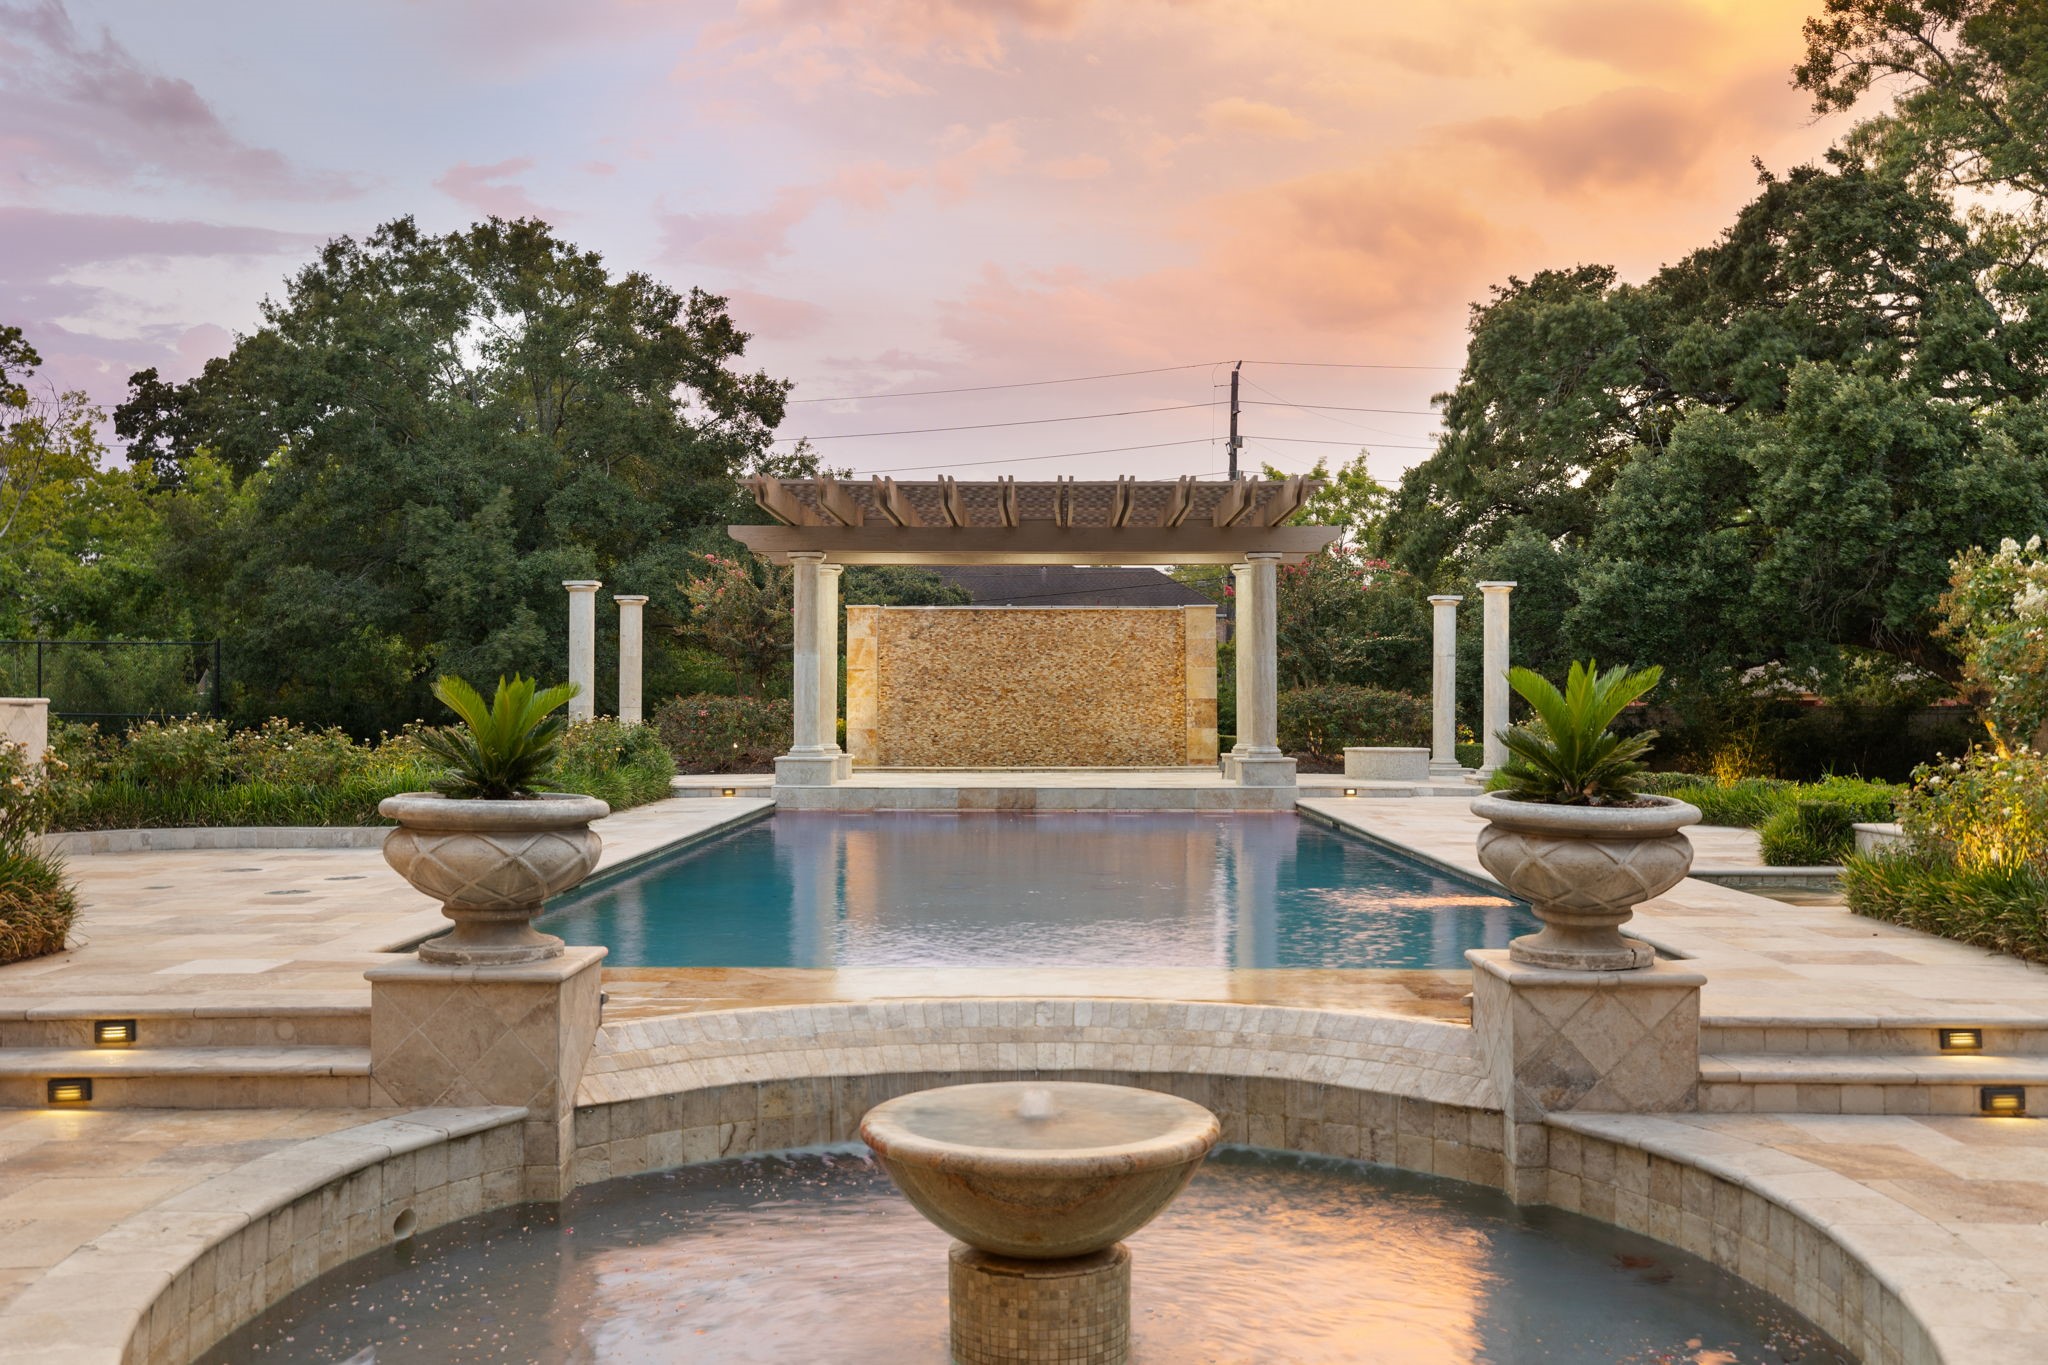 The Back Yard is rich with water as sculpture. Here a bubbling fountain within a waveless basin draw your eye towards the heated swimming pool and stone framed wall of water.